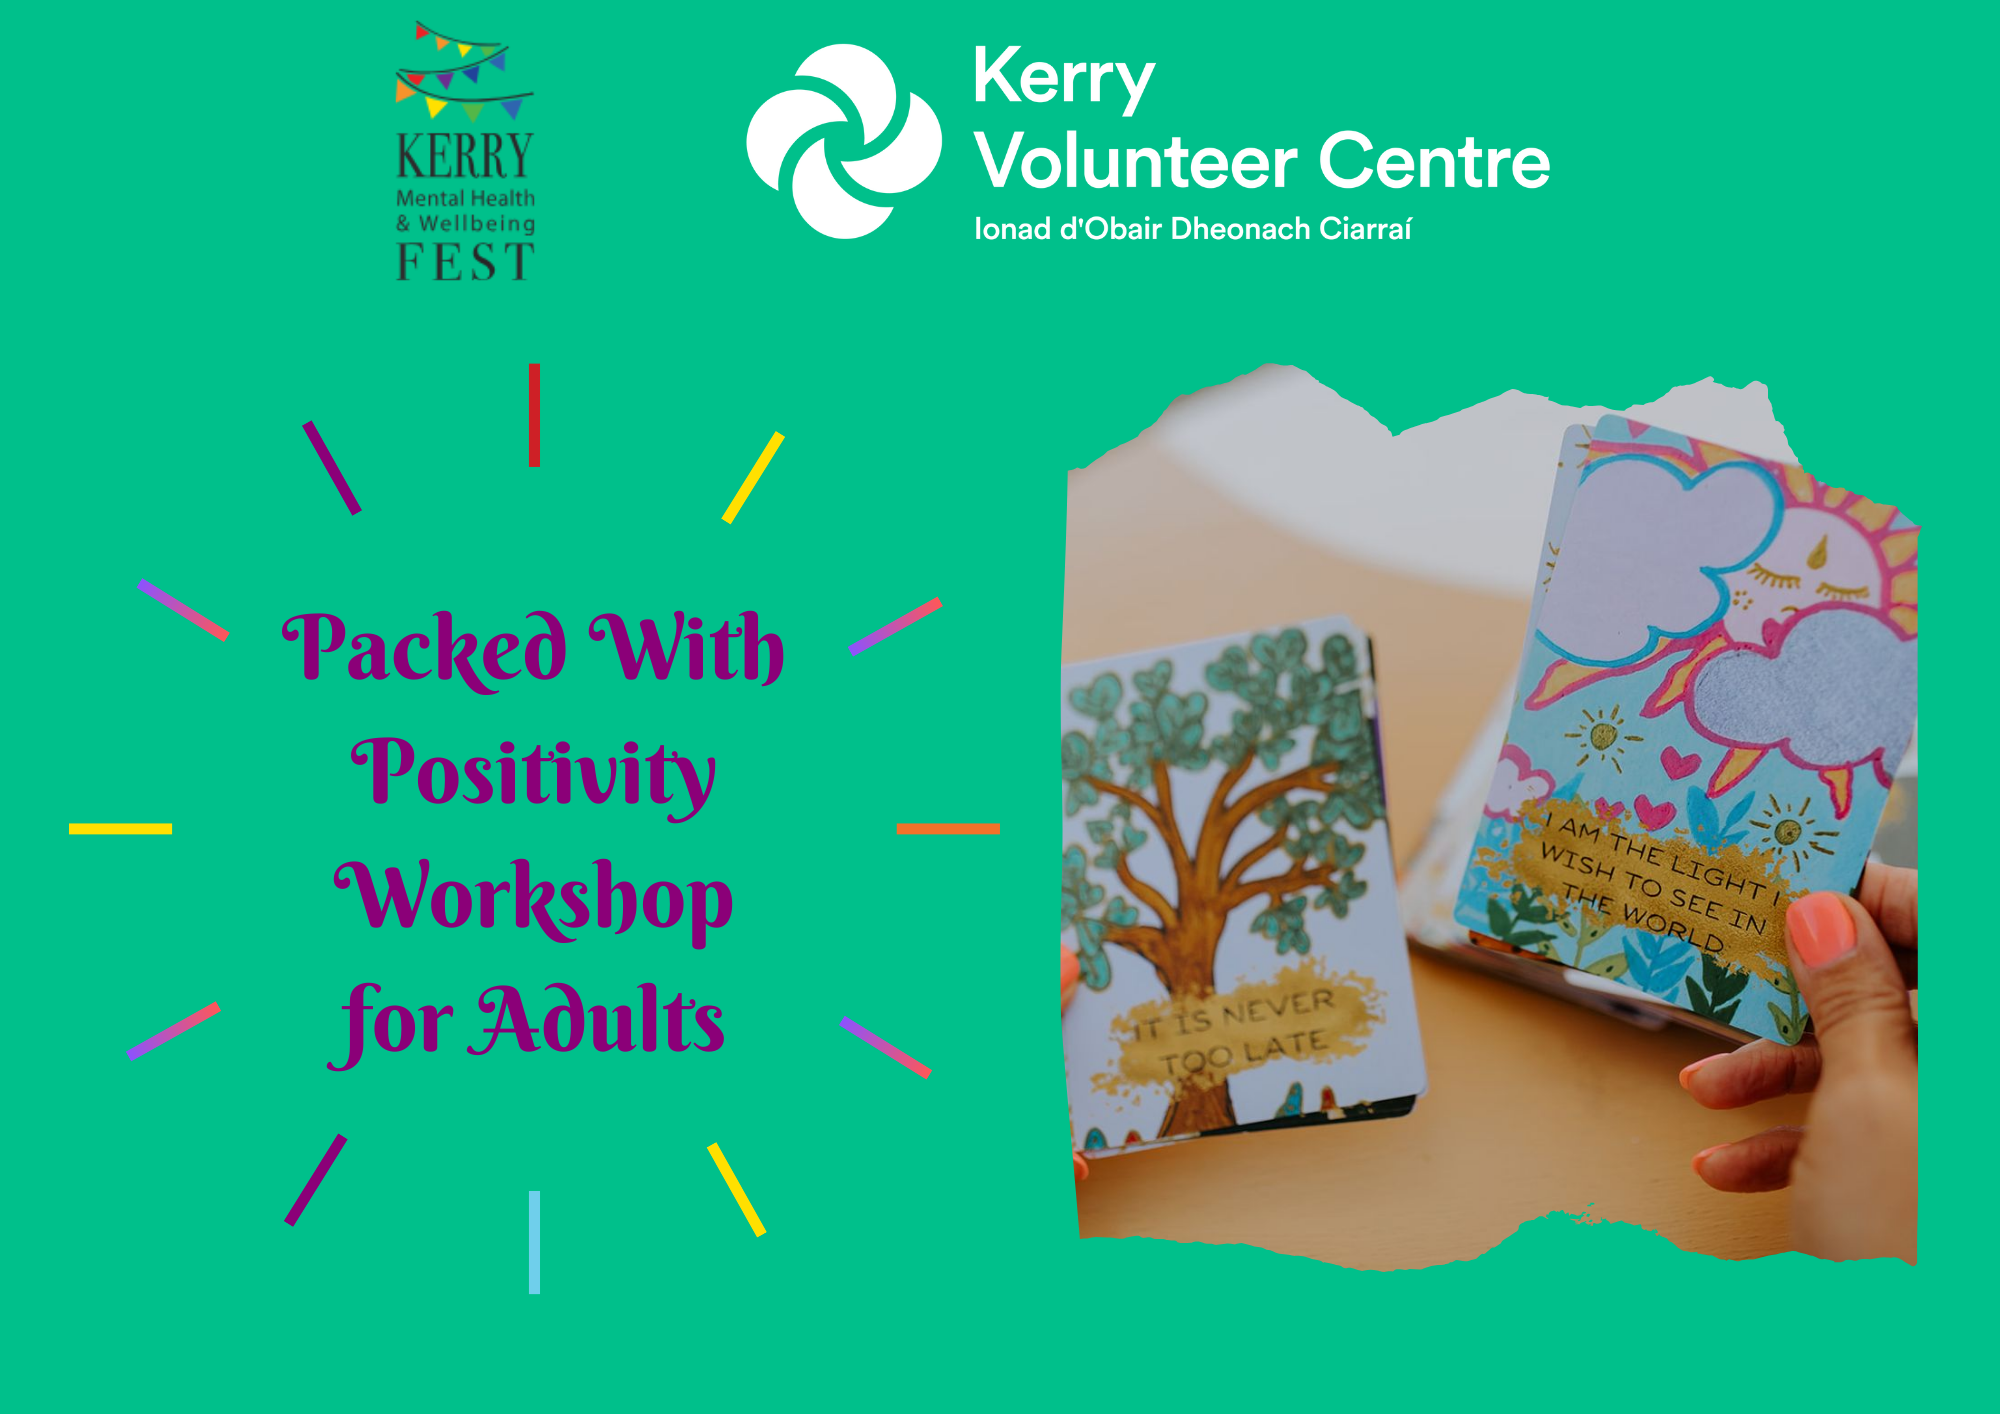 Packed With Positivity- Adult Workshop event at Kerry Mental Health & Wellbeing Fest 2022